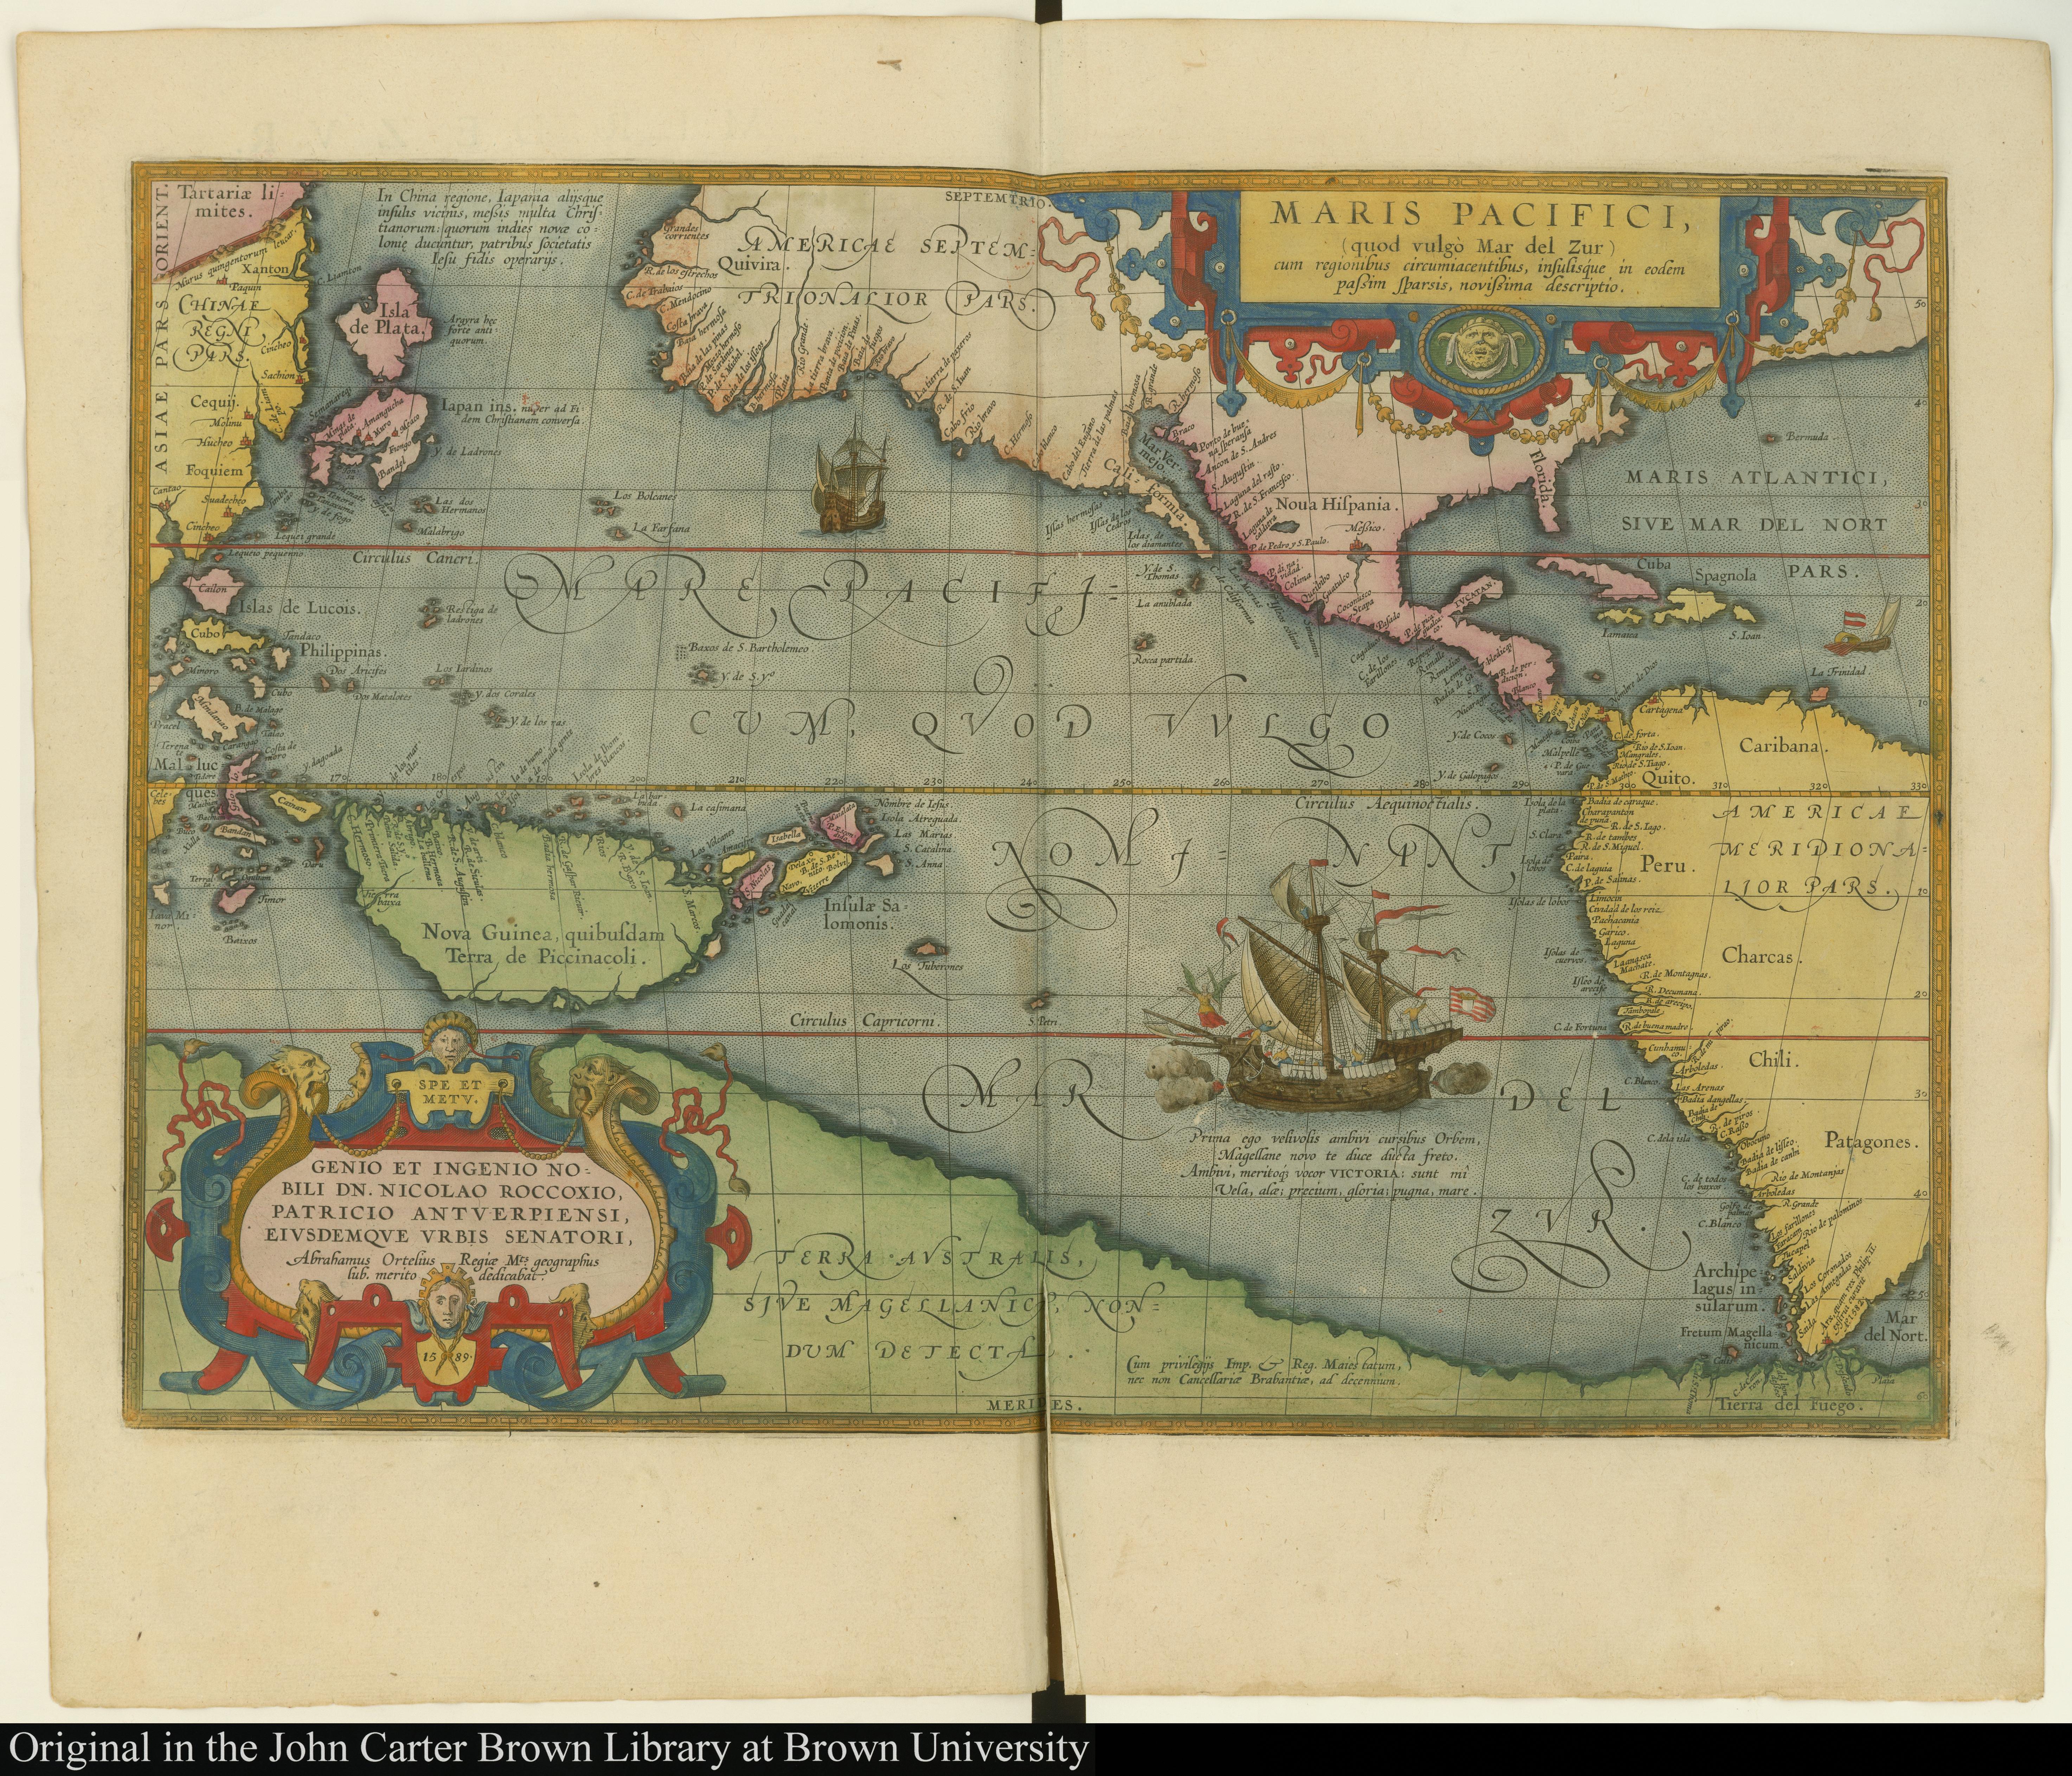 “Maris Pacifici.” Engraving. Created by Abraham Ortelius. Antwerp, 1589. Original at the John Carter Brown Library, Brown University, Providence, RI. 